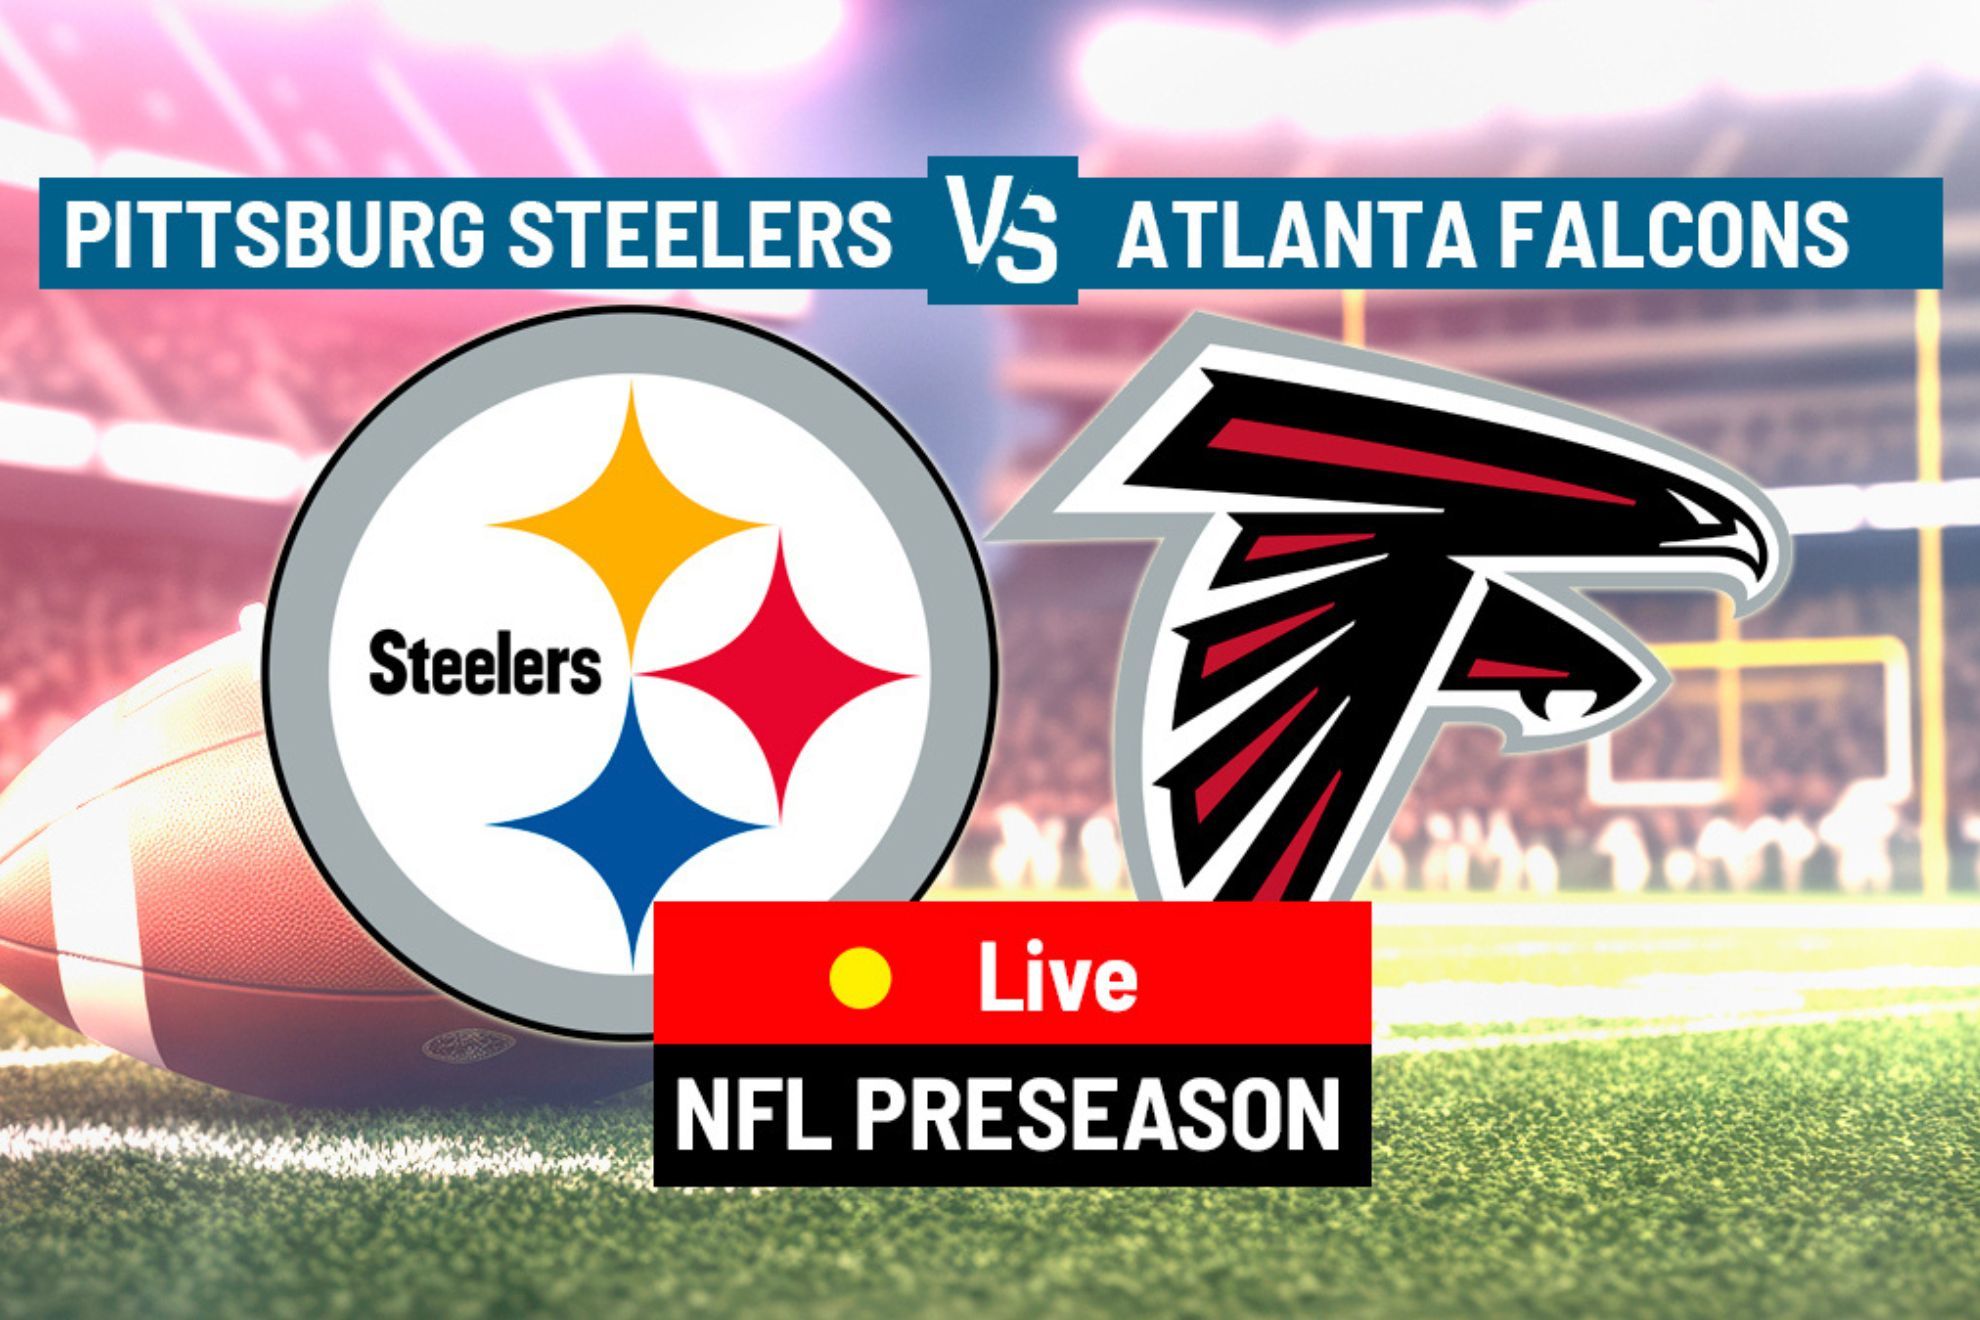 Steelers - Falcons LIVE: Preview, start time and latest updates